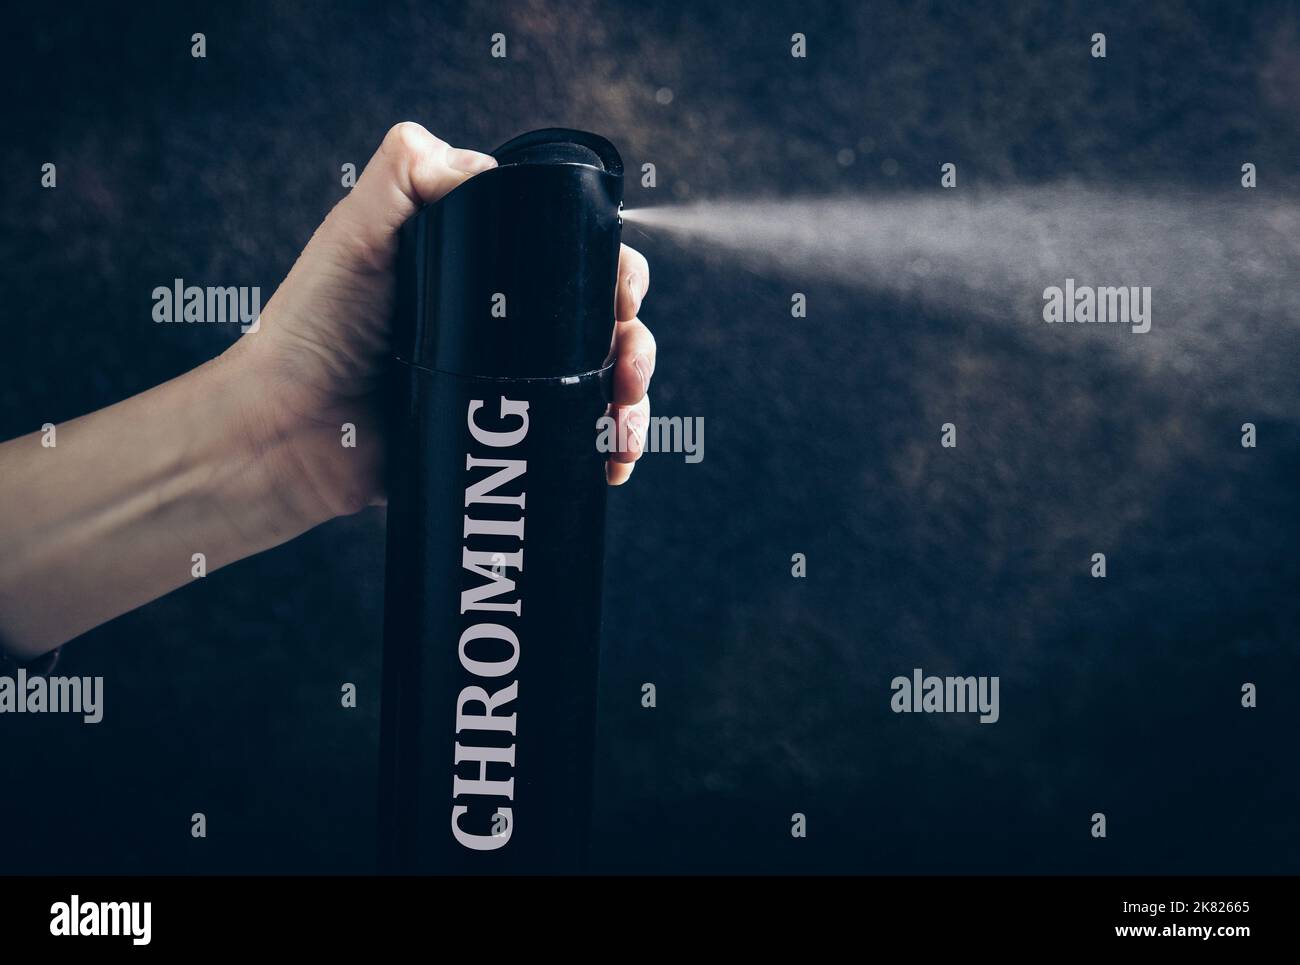 Conceptual image of chroming. Process of getting high using household chemicals to inhale. Child hand holding hairspray bottle and spray aerosol. Stock Photo